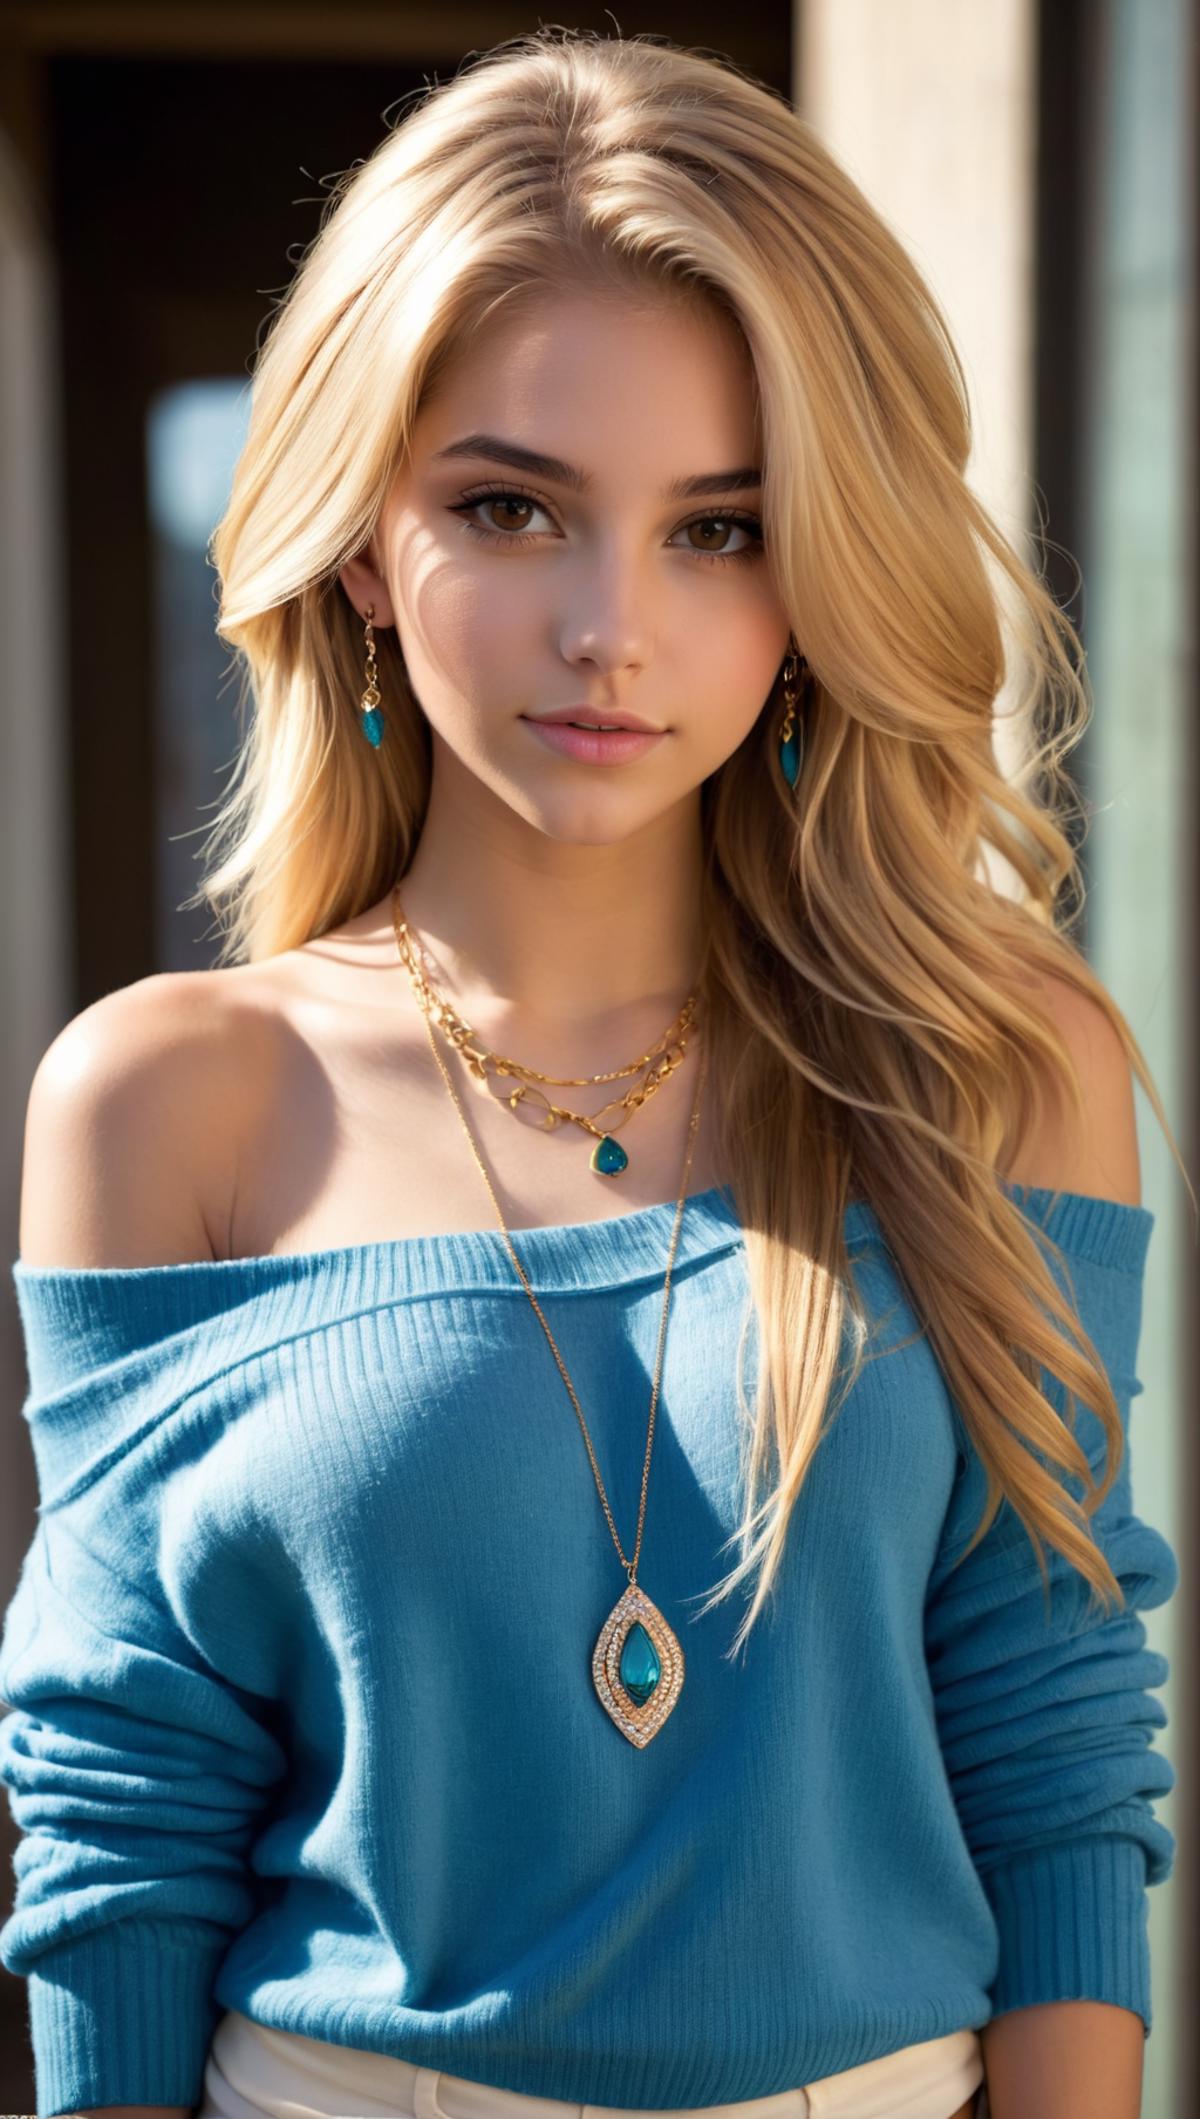 Blonde Woman Wearing a Blue Sweater and Choker Necklace.